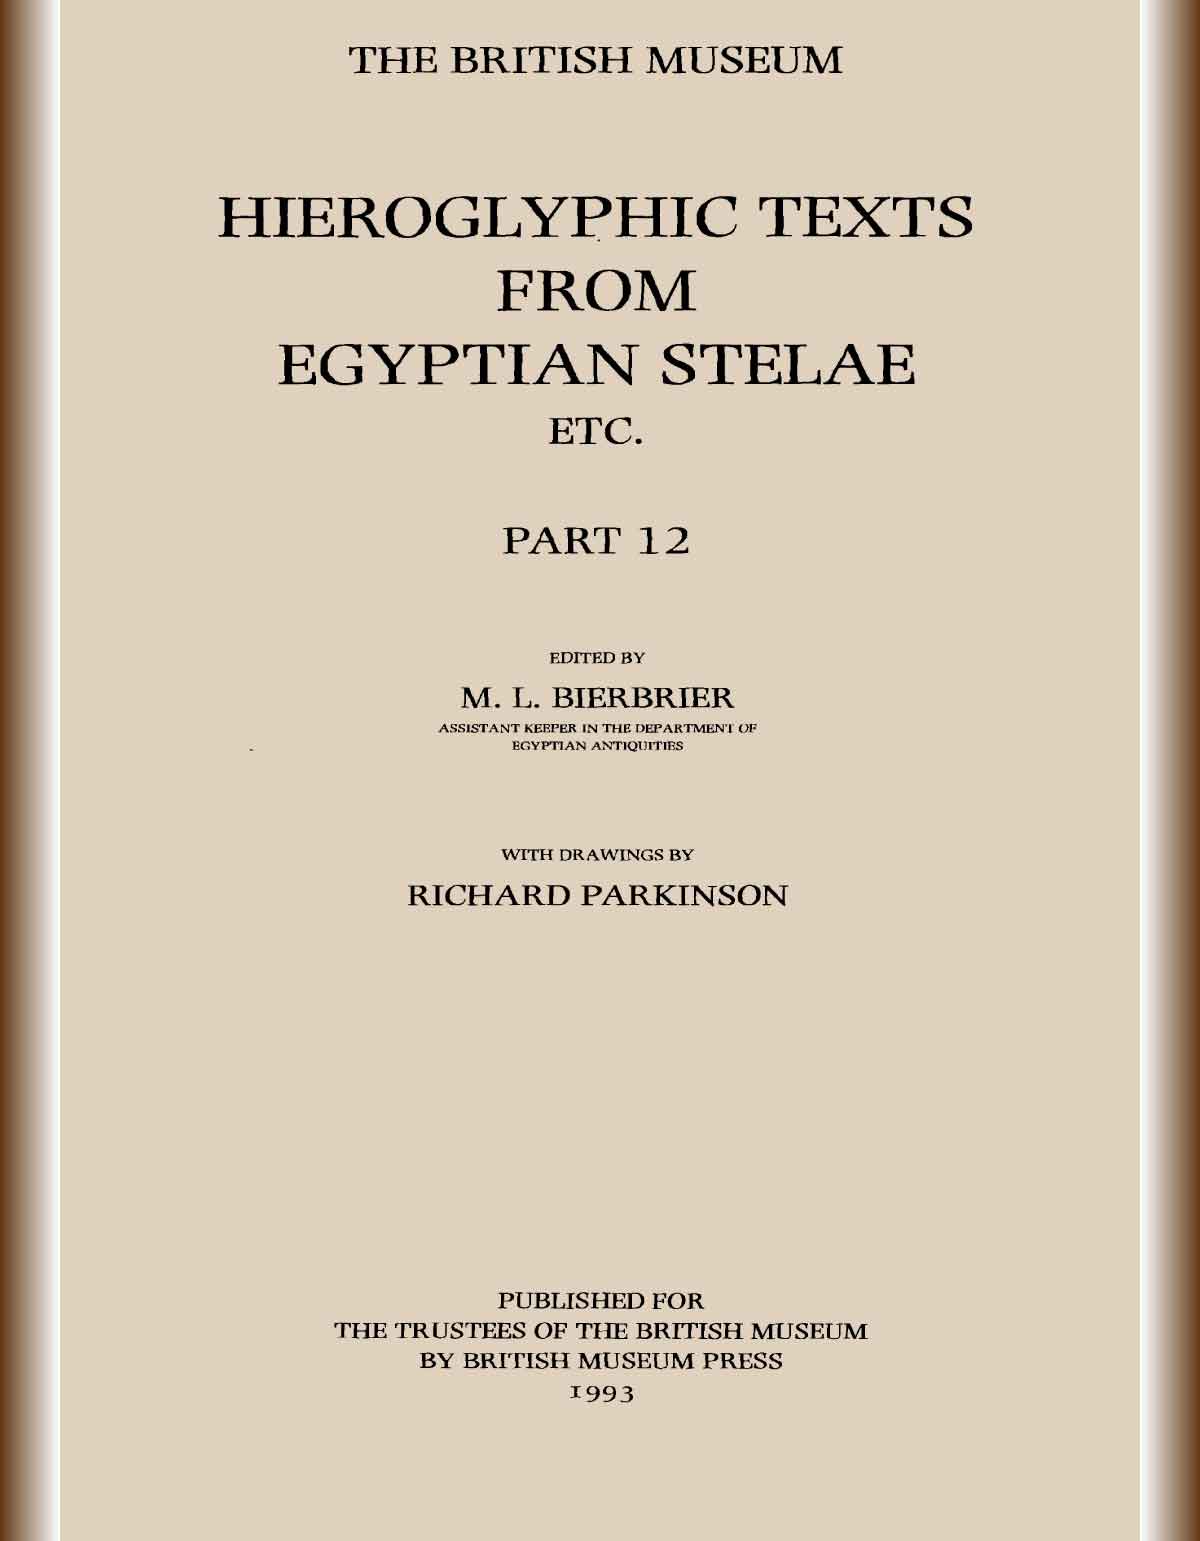 Hieroglyphic texts from Egyptian stelae etc. Part 12-cover